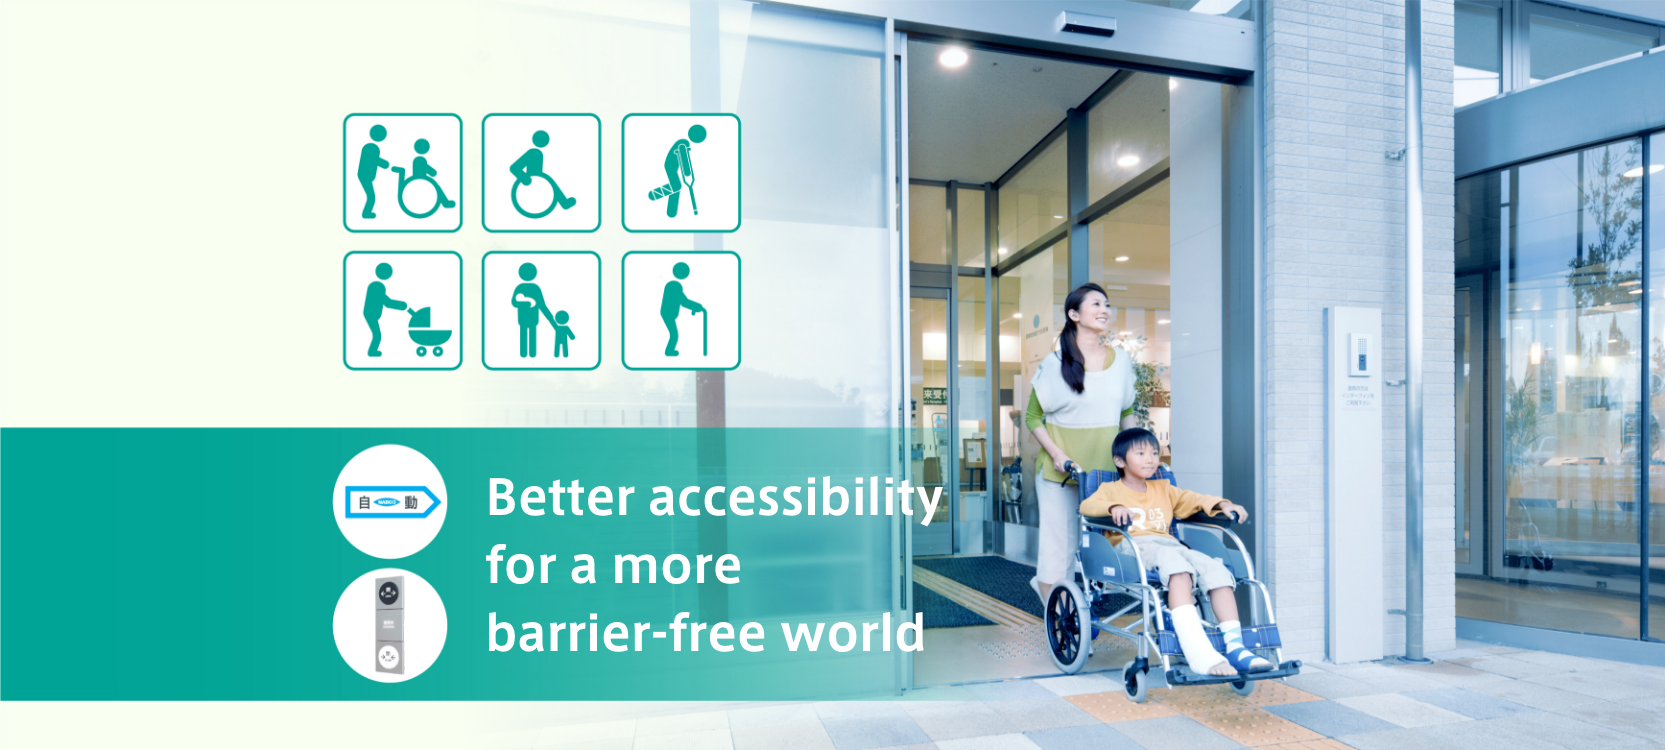 Better accessibility, for a more barrier-free world.